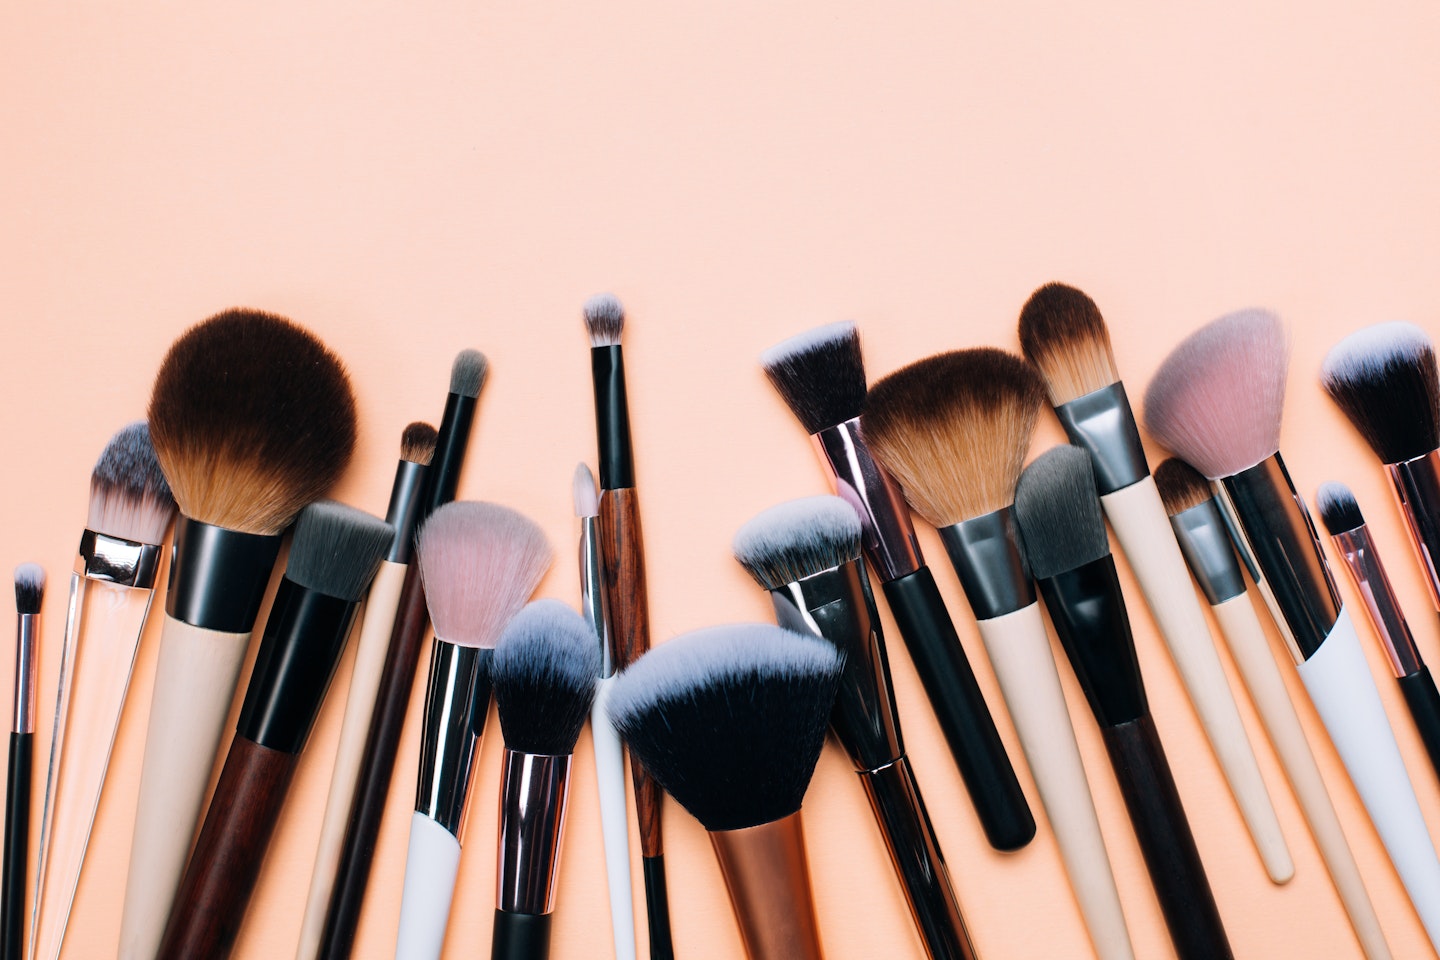 https://images.bauerhosting.com/legacy/media/603e/504f/4098/7f77/6a7f/1c6c/how%20often%20you%20should%20clean%20your%20make-up%20brushes.jpg?ar=16%3A9&fit=crop&crop=top&auto=format&w=1440&q=80